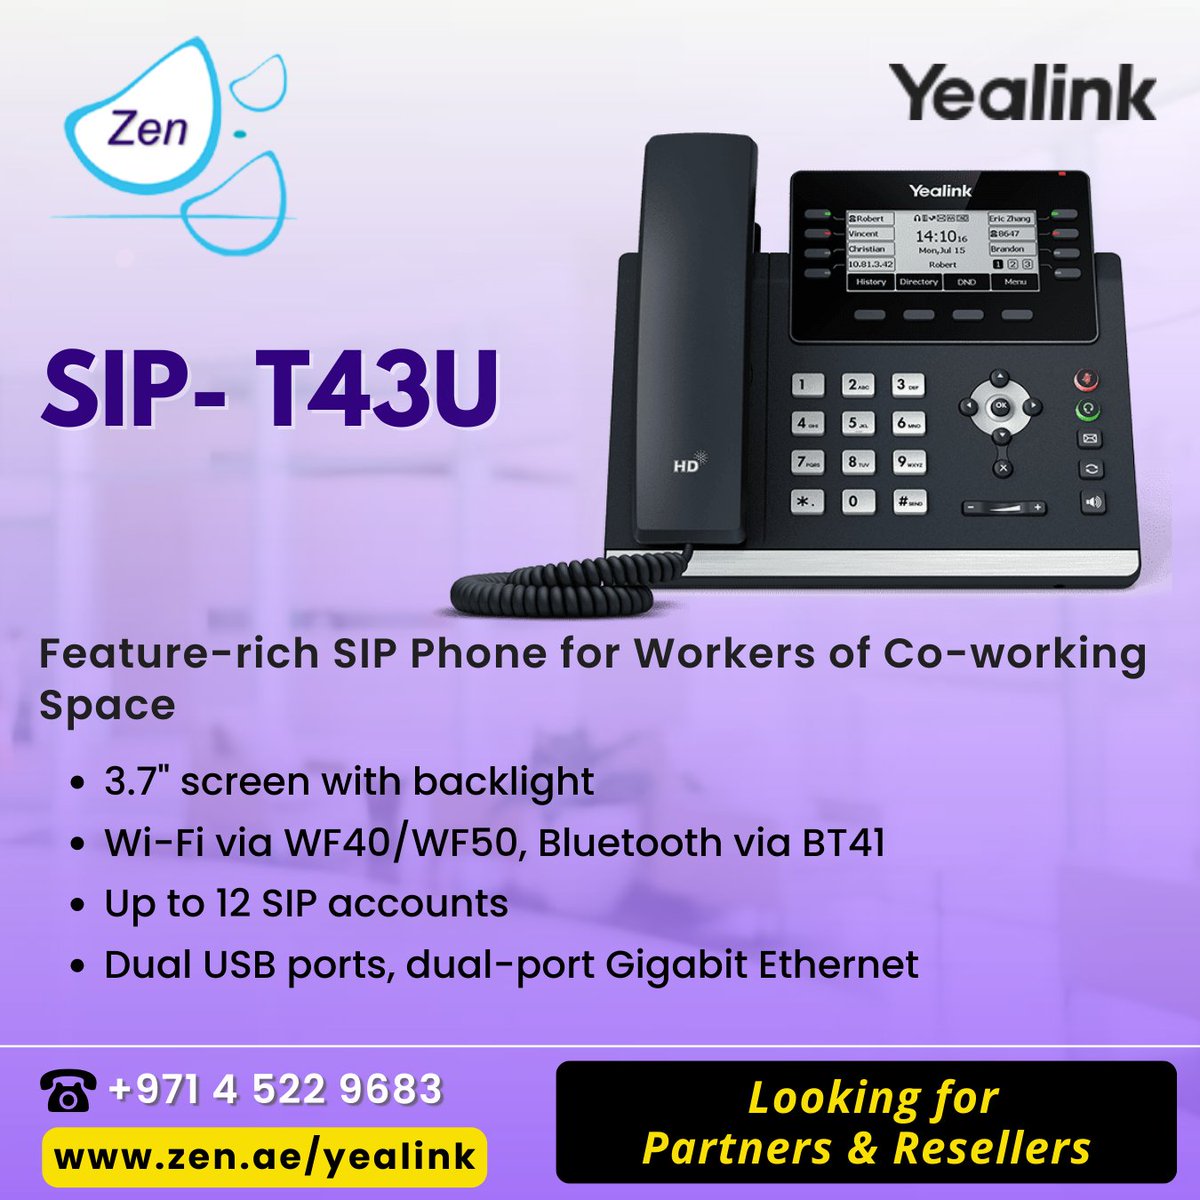 #yealink  SIP- T43U
Feature-rich SIP Phone for Workers of Co-working Space
Looking for partners & resellers.

smpl.is/8l17f

#3cx #zenitdxb #zenit #businesscommunication #dubaistartup #3cxhosting #simhosting #saudistartups